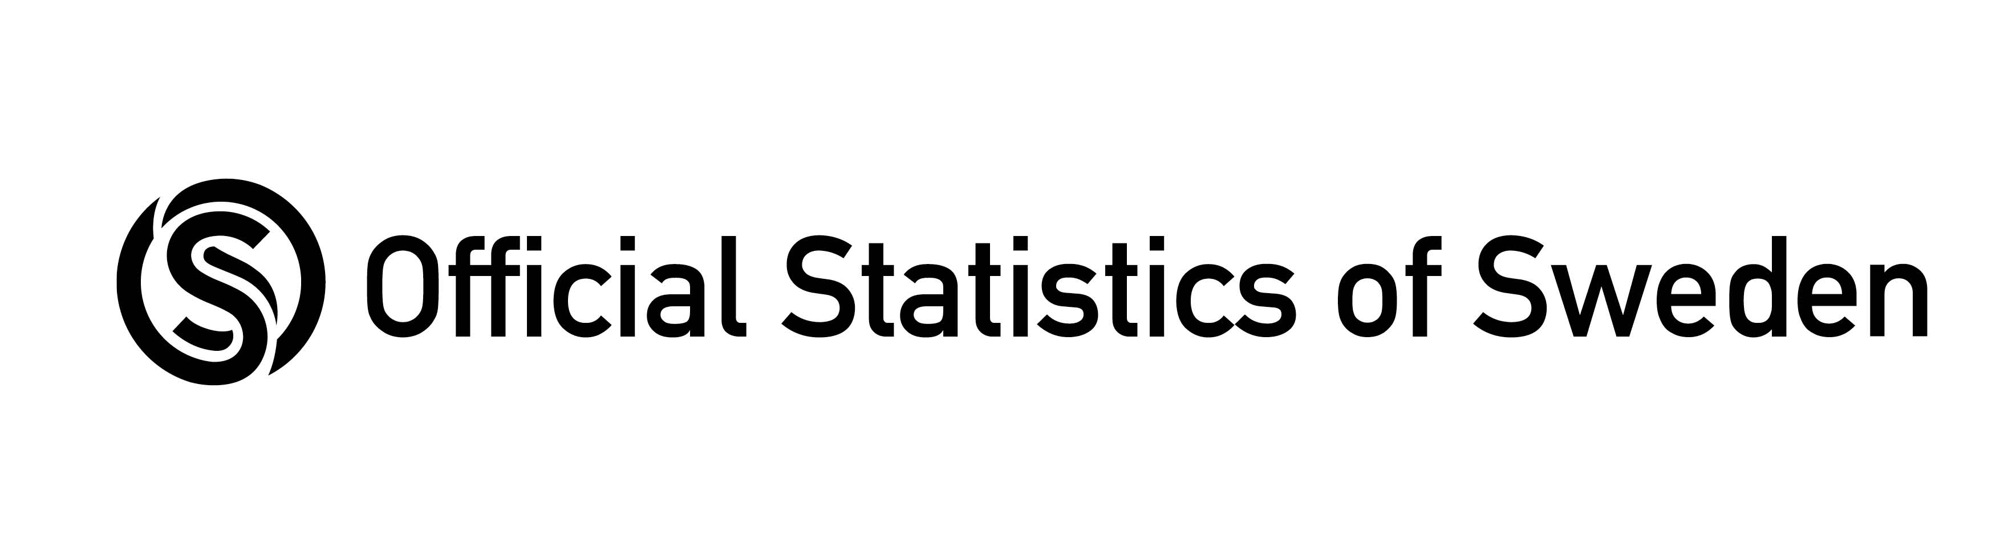 logotype for official statistics of Sweden